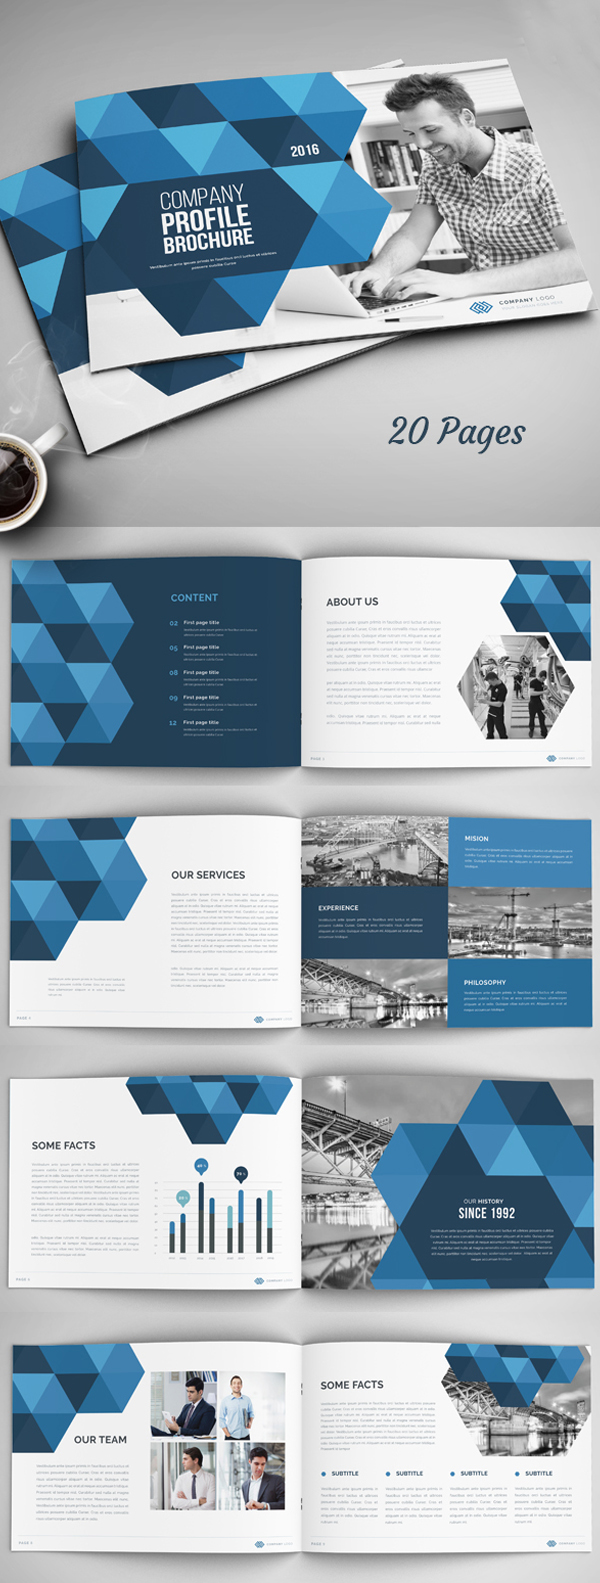 20 Pages Annual Report / Company Profile Brochure Template